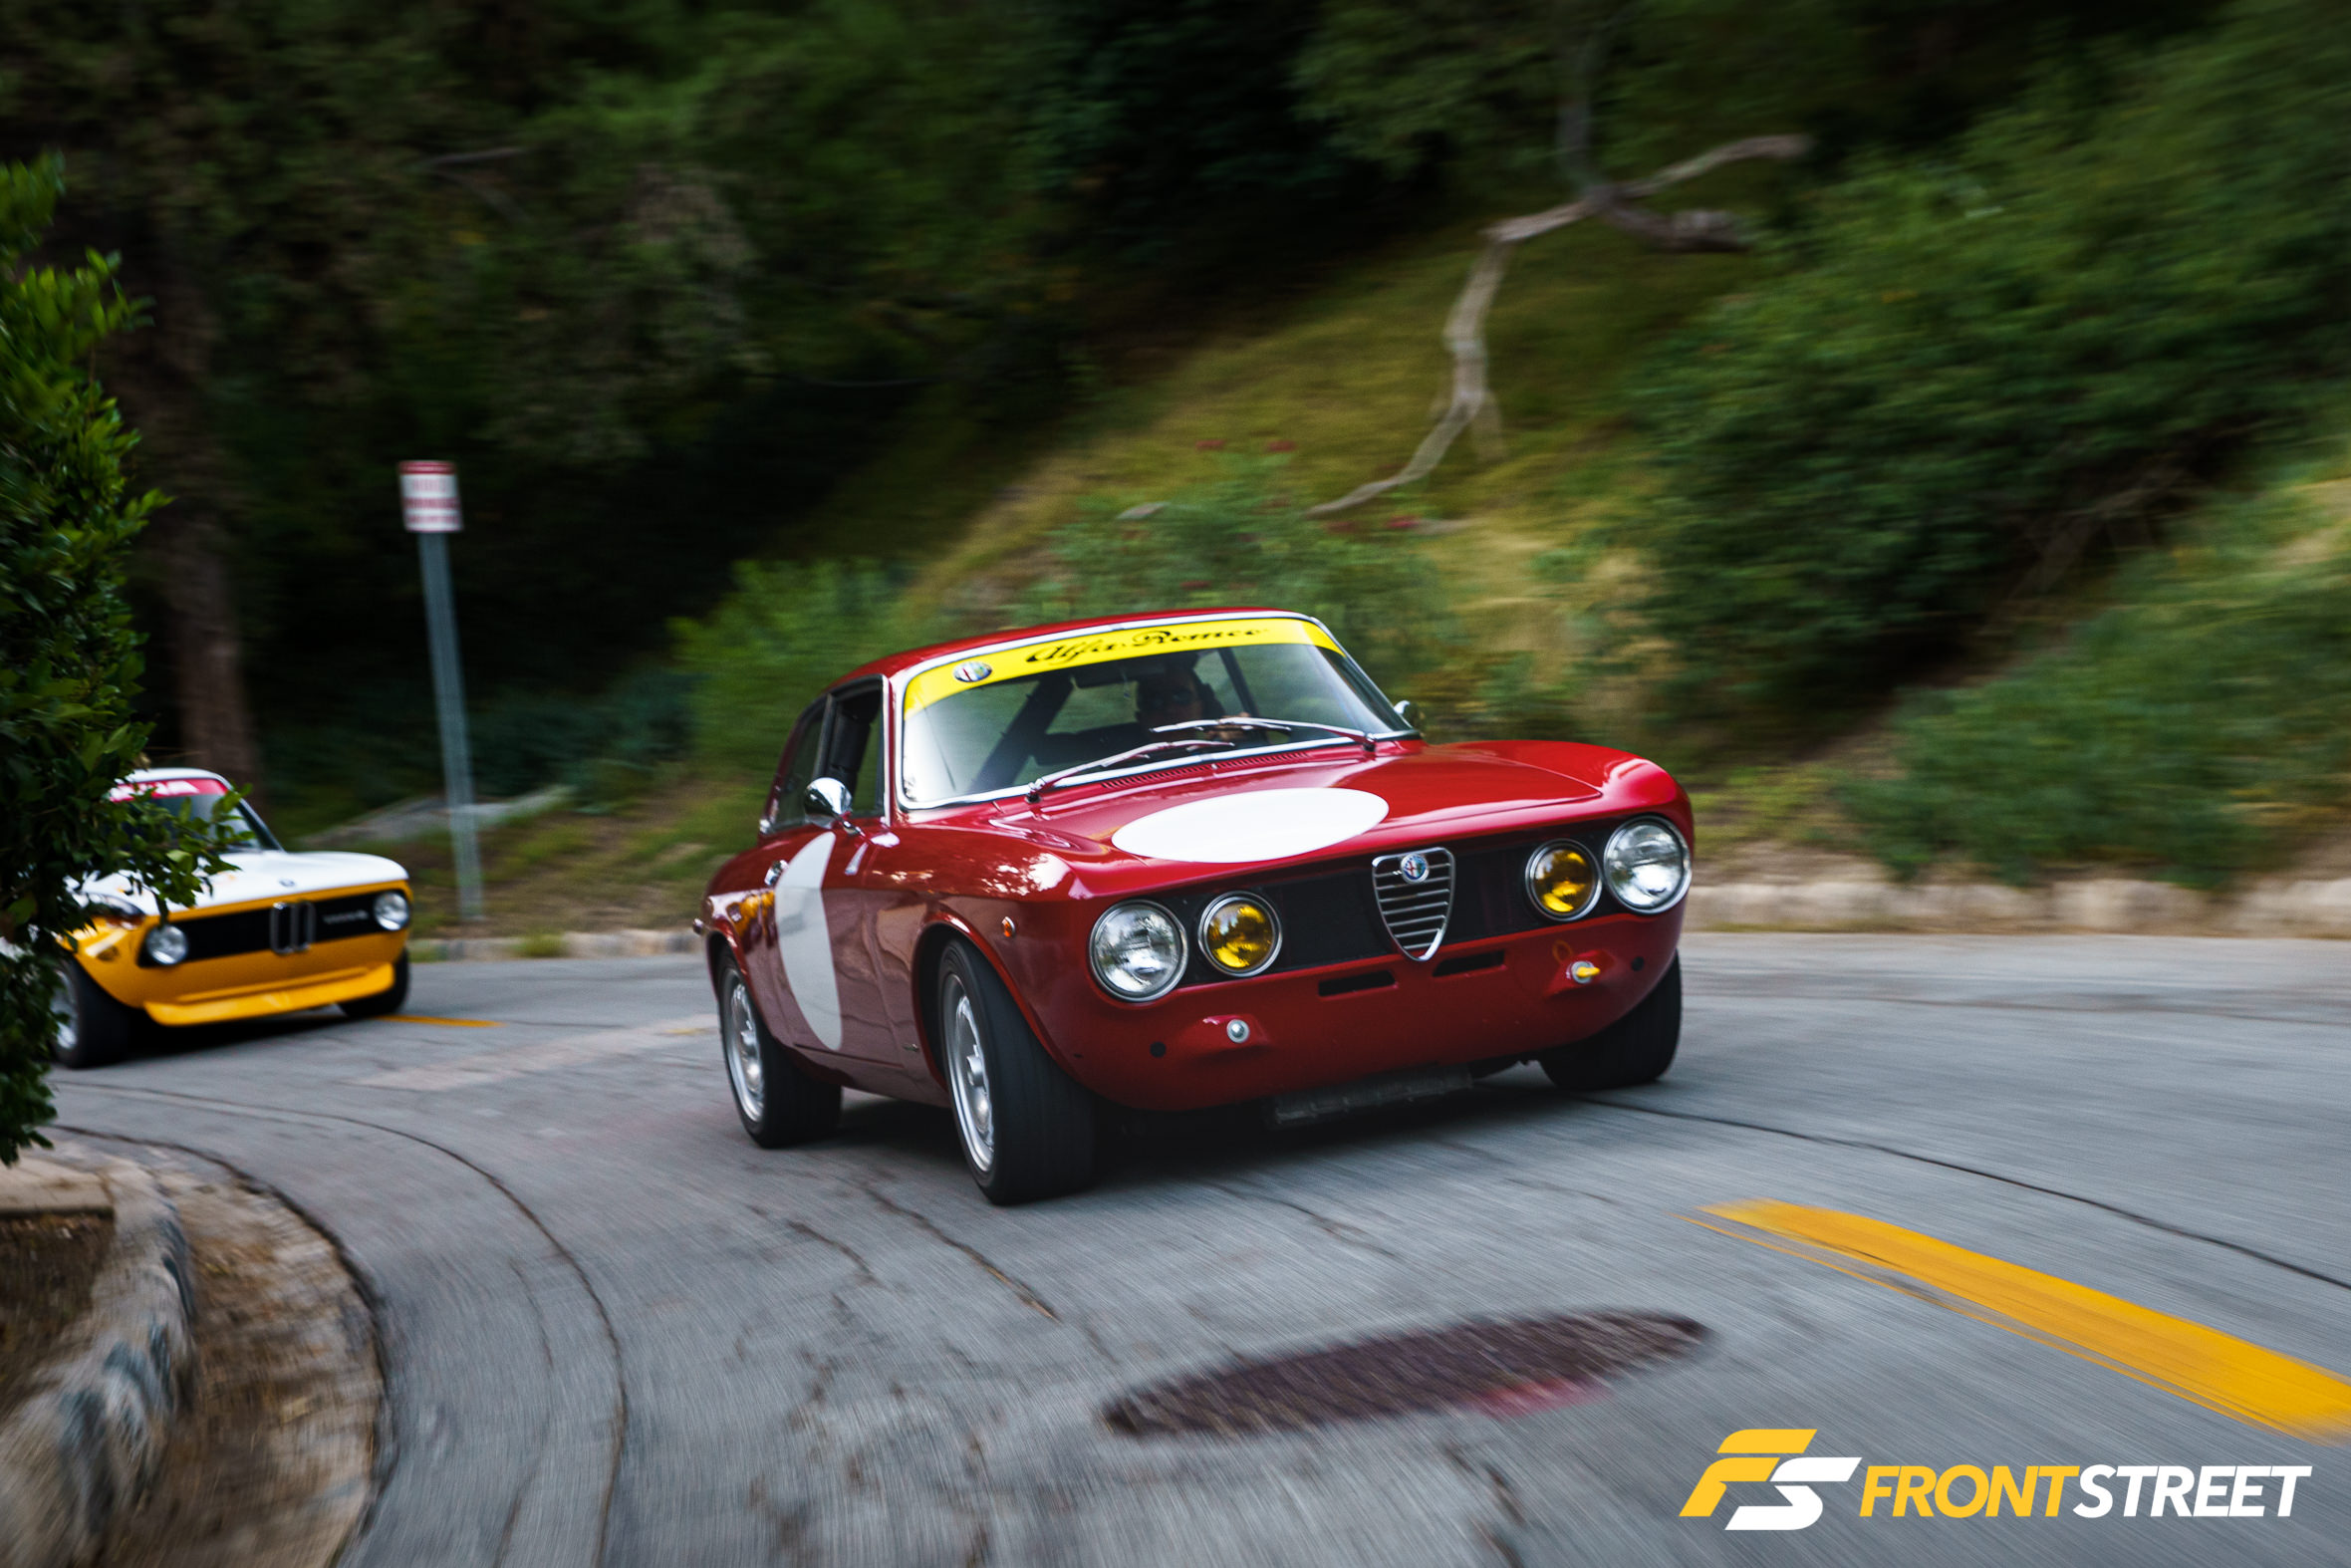 Meeting Your Heroes: Vache's Exquisite BMW 2002 And Alfa Romeo GTV